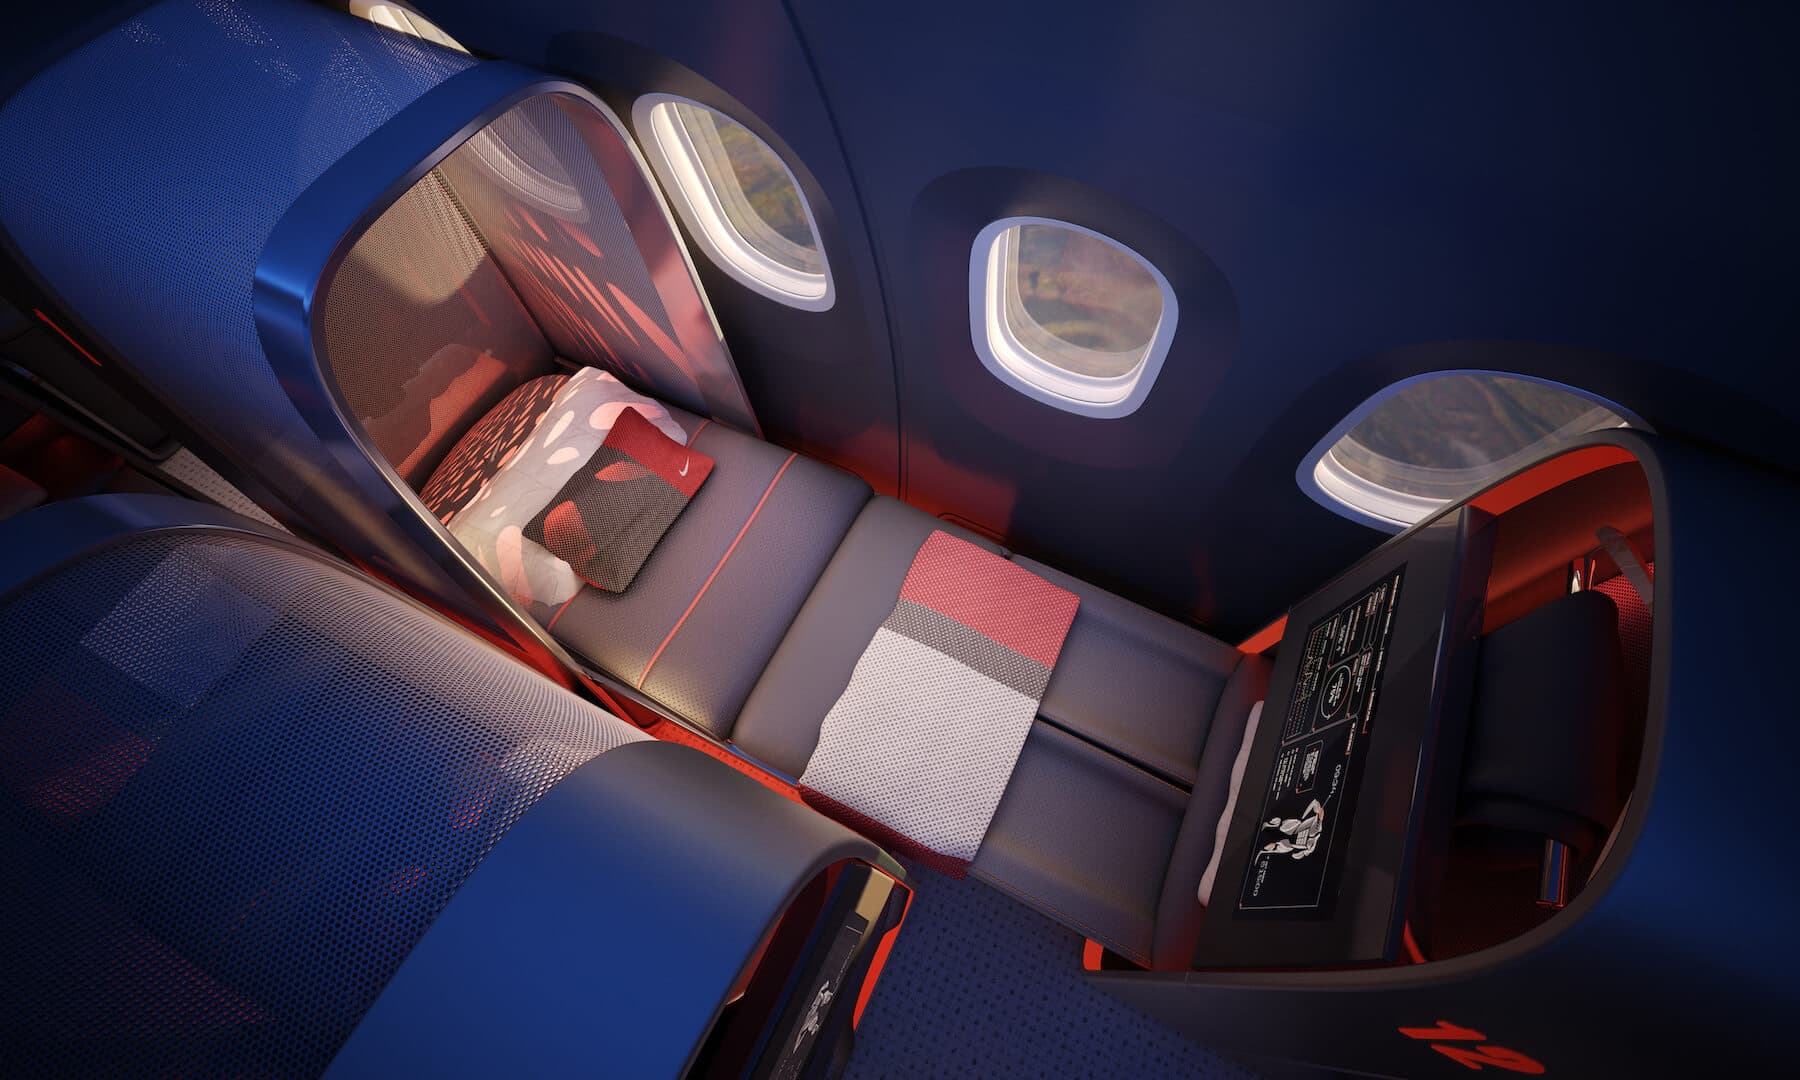 Top view of lay flat seat in airplane with red and white blanket and blue dynamic lighting